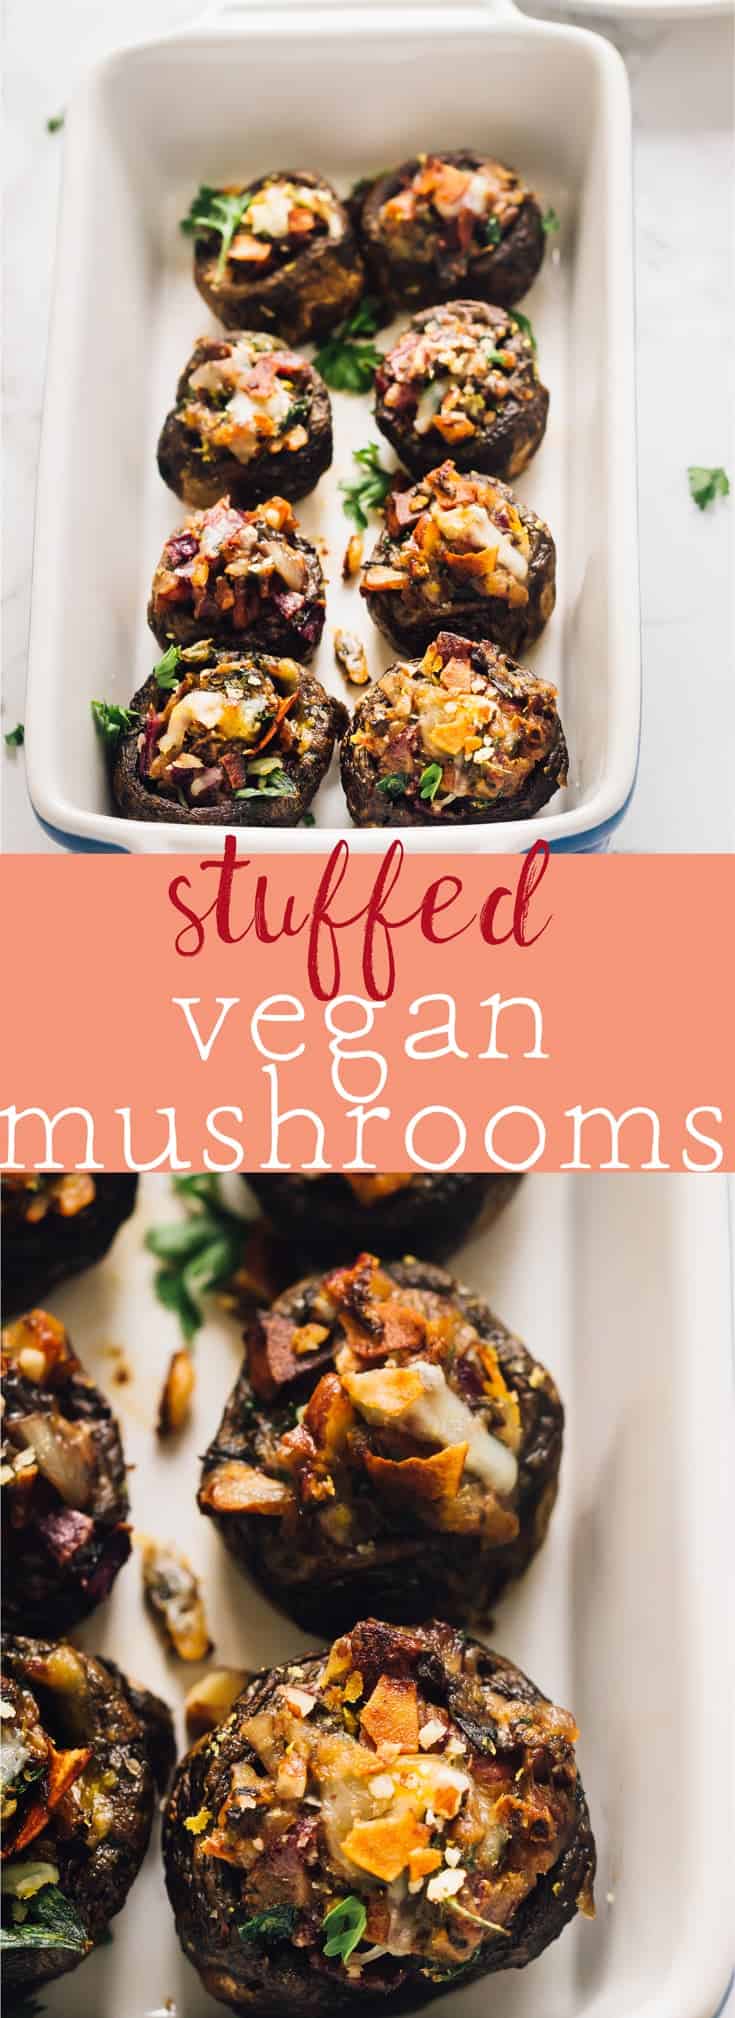 These Stuffed Mushrooms with Coconut Bacon are an easy, tried and true delicious side dish! It's vegan, gluten free and a healthier alternative to traditional stuffed mushrooms. via https://jessicainthekitchen.com